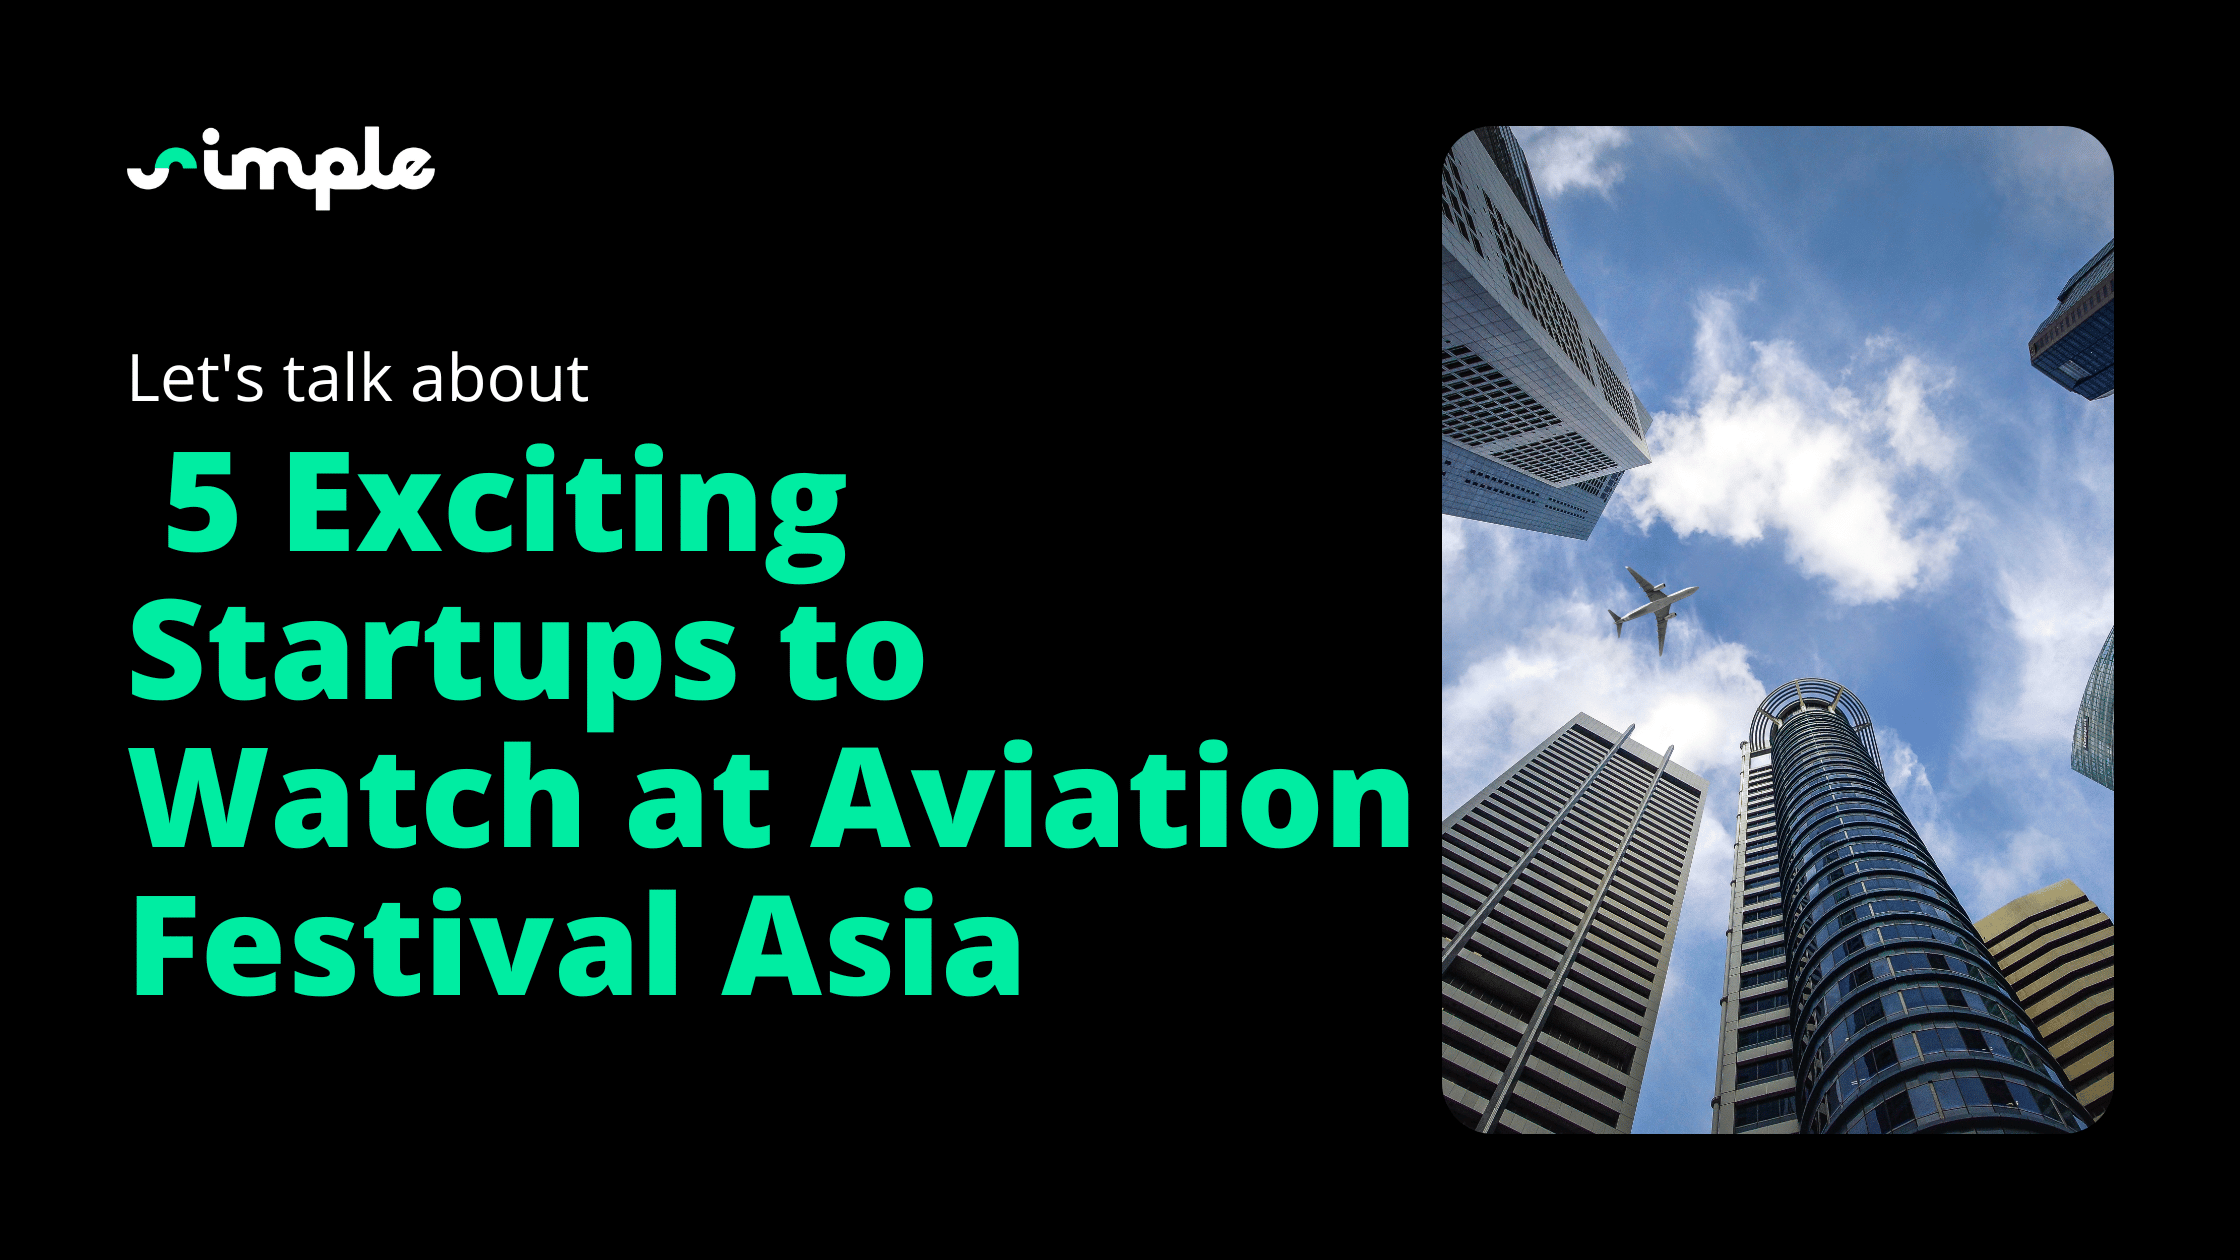 5 Exciting Startups to Watch at Aviation Festival Asia!